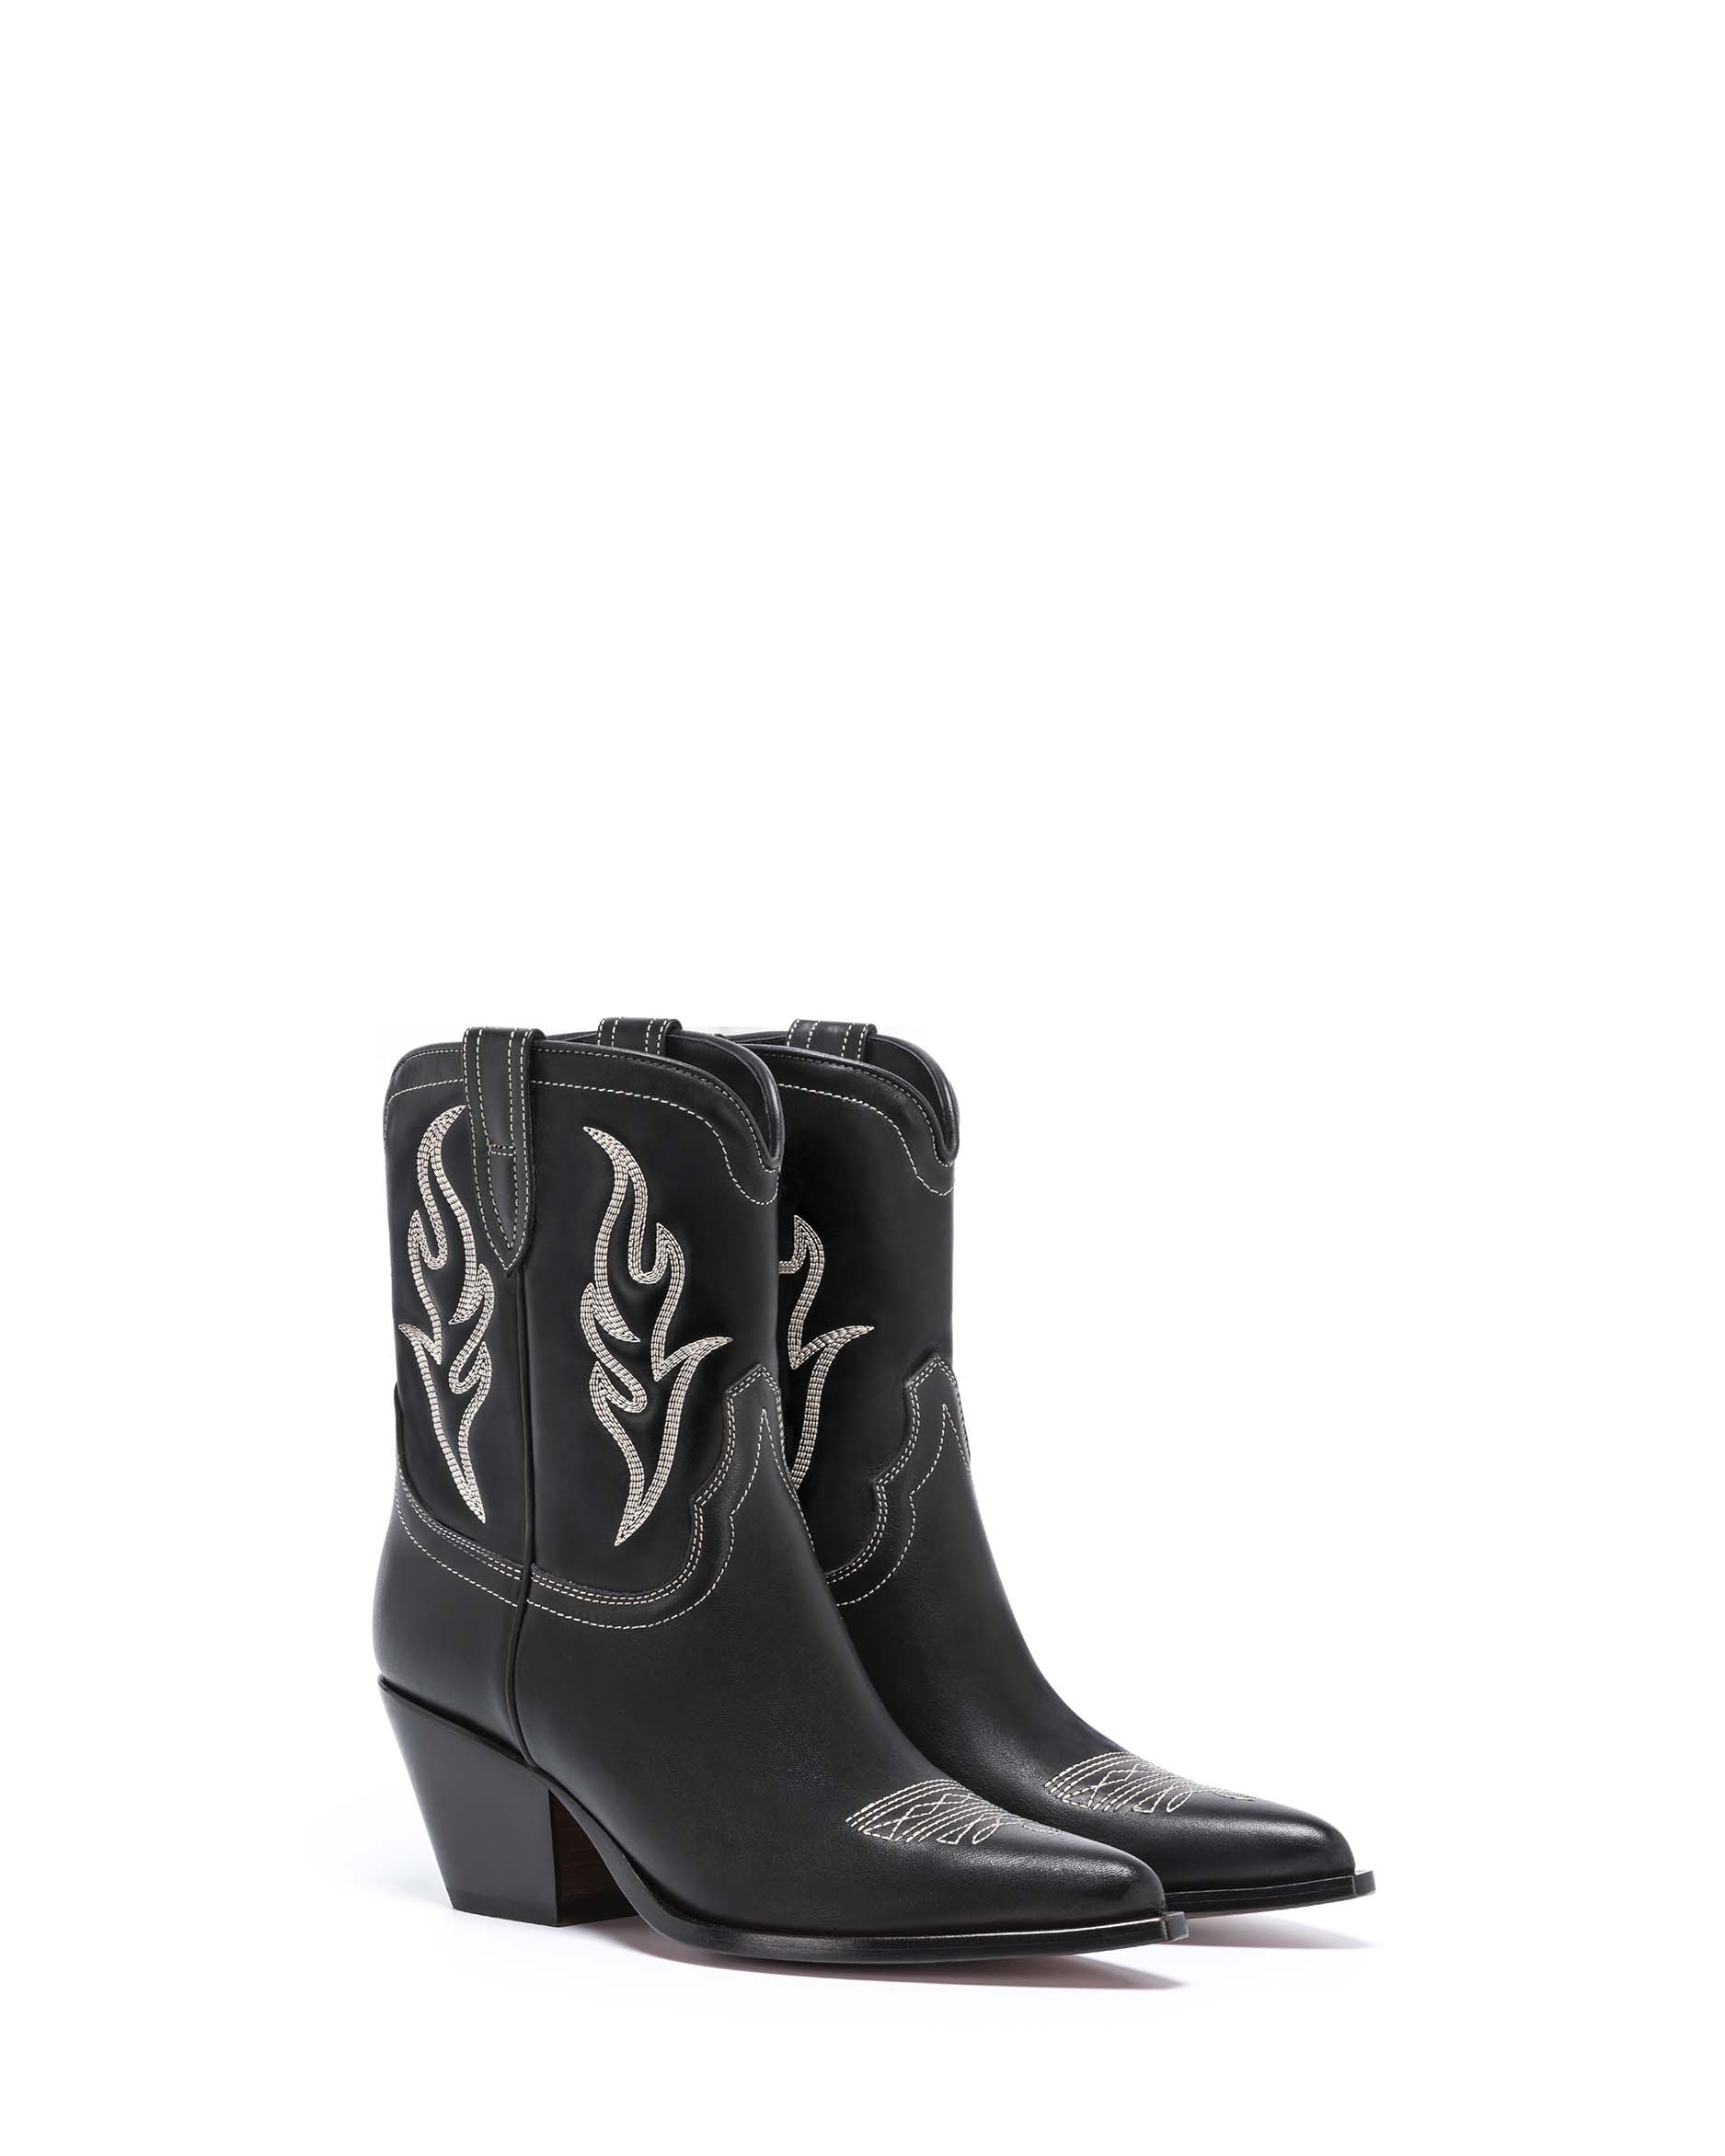 PERLA Women's Ankle Boots in Black Calf Leather | Off-White Embroidery_Front_02